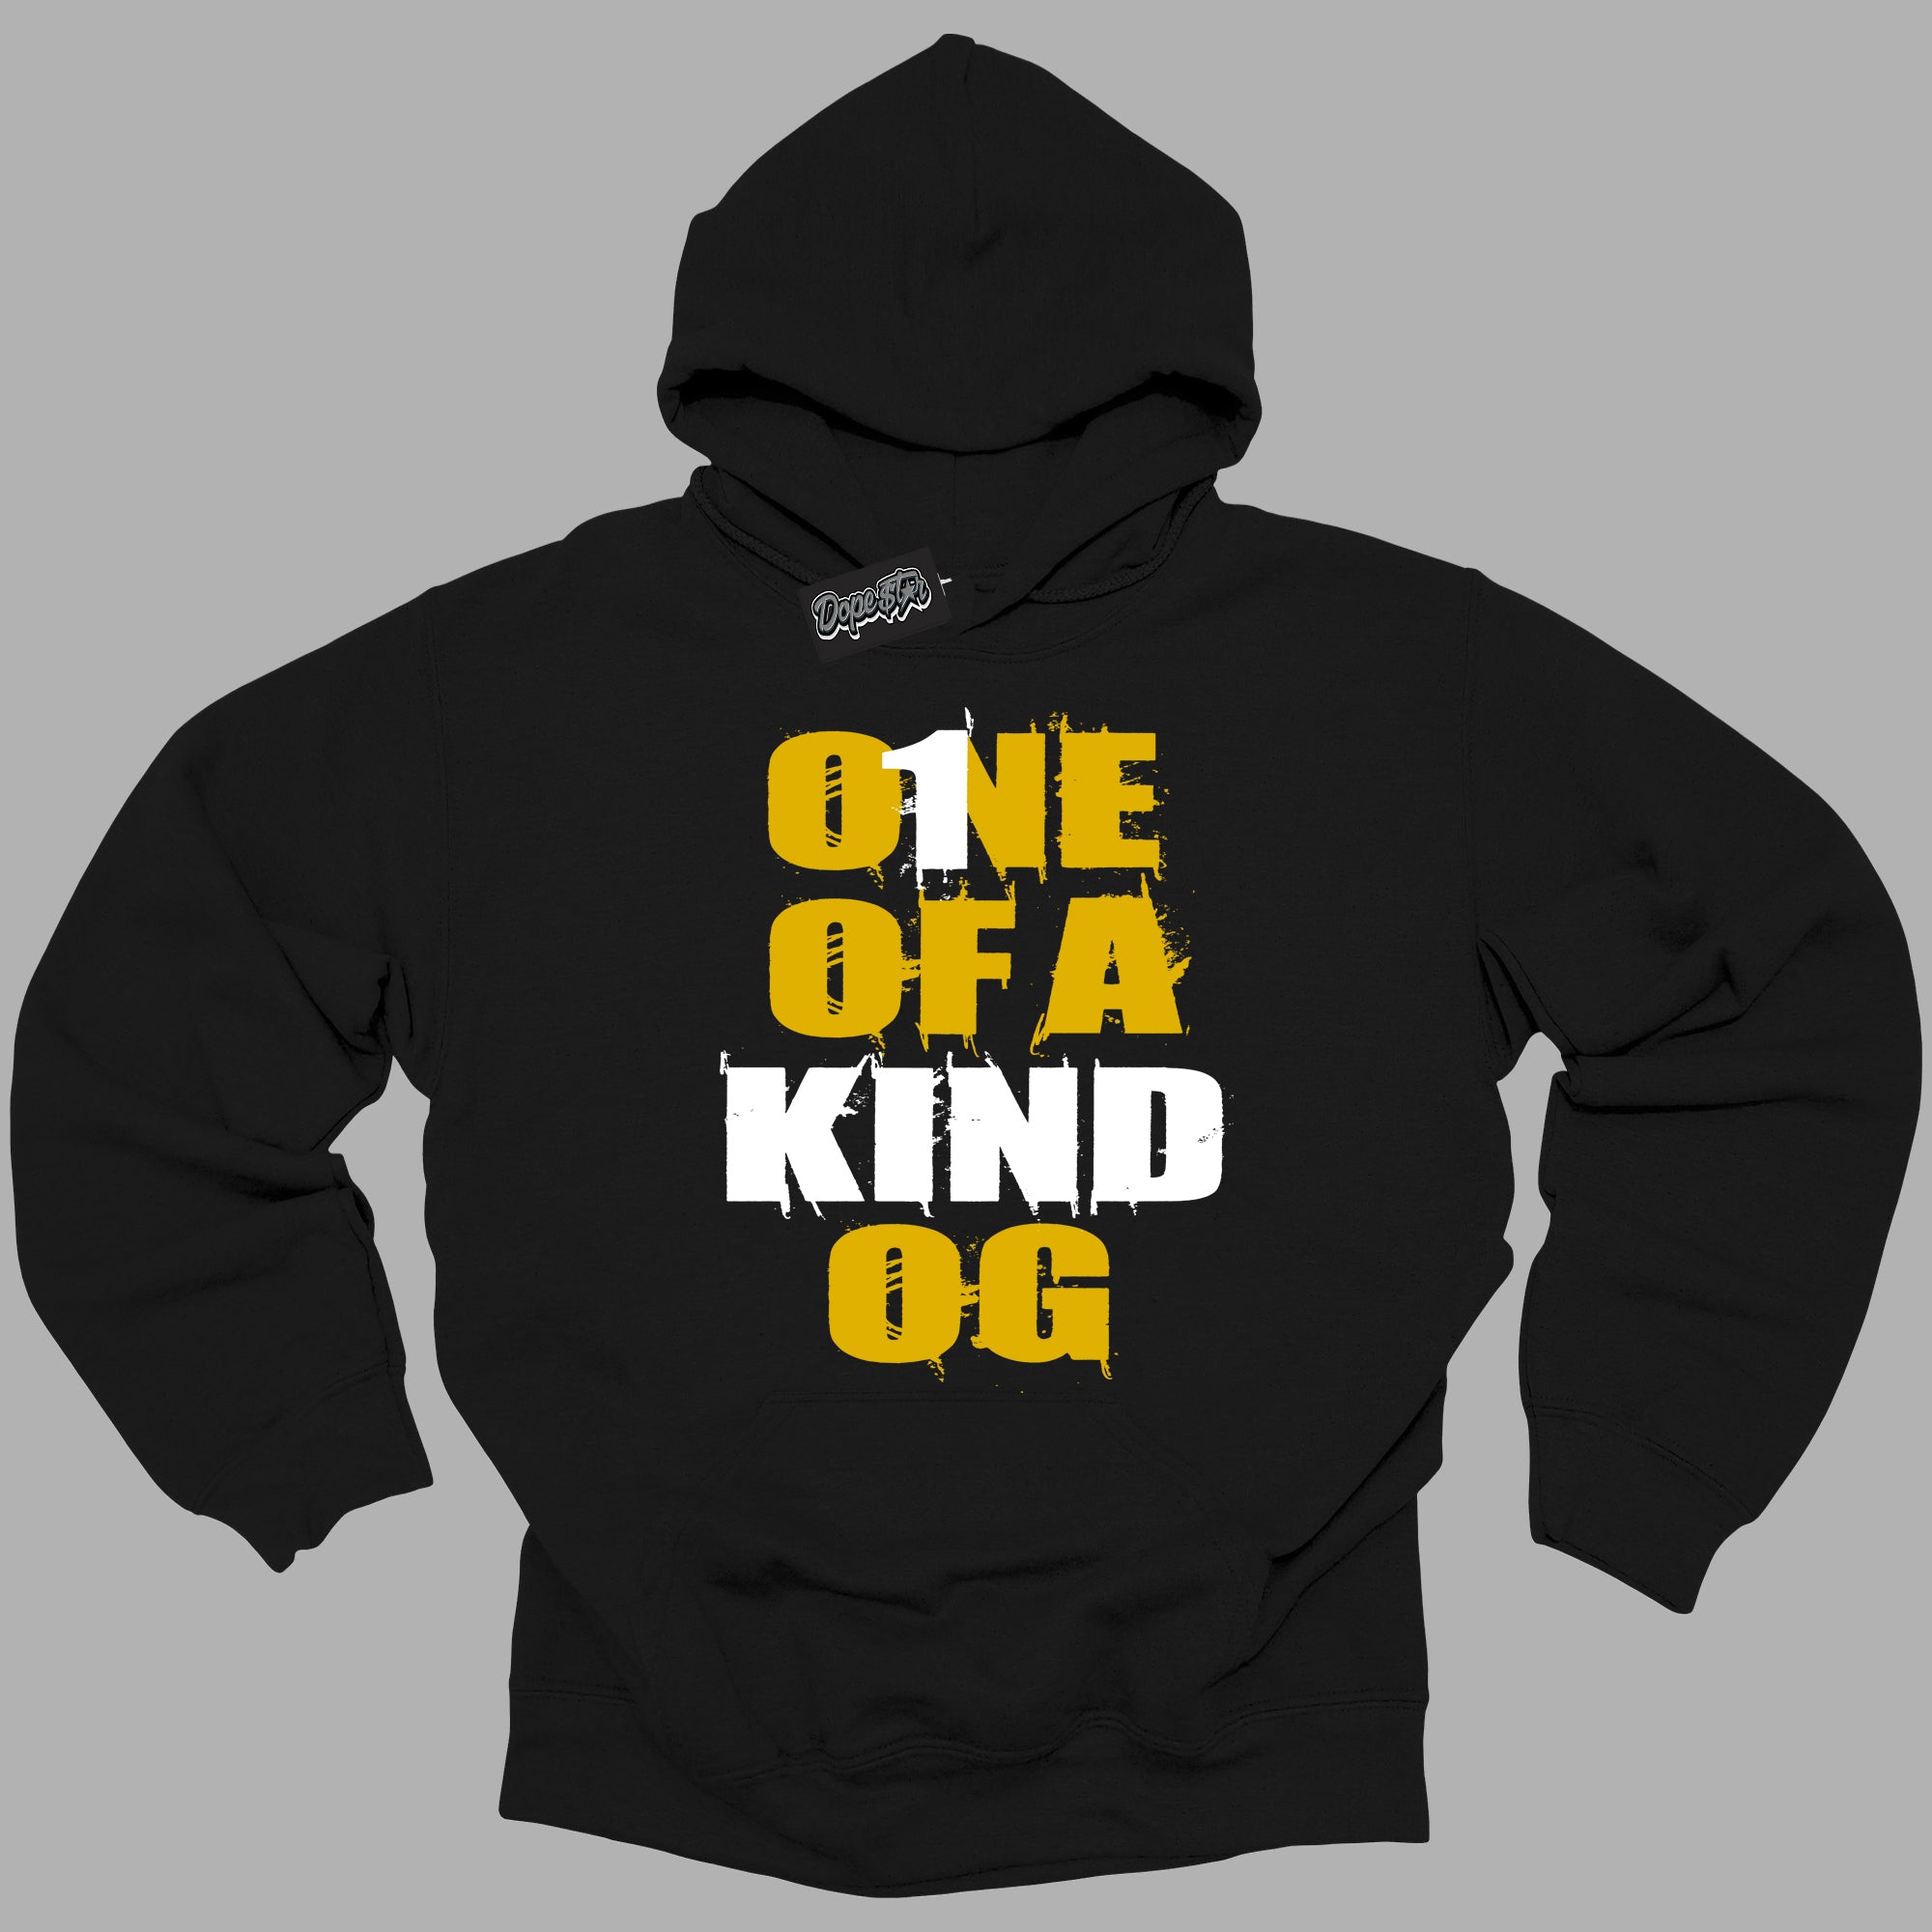 Cool Black Hoodie with “One Of A Kind ”  design that Perfectly Matches Yellow Ochre 6s Sneakers.